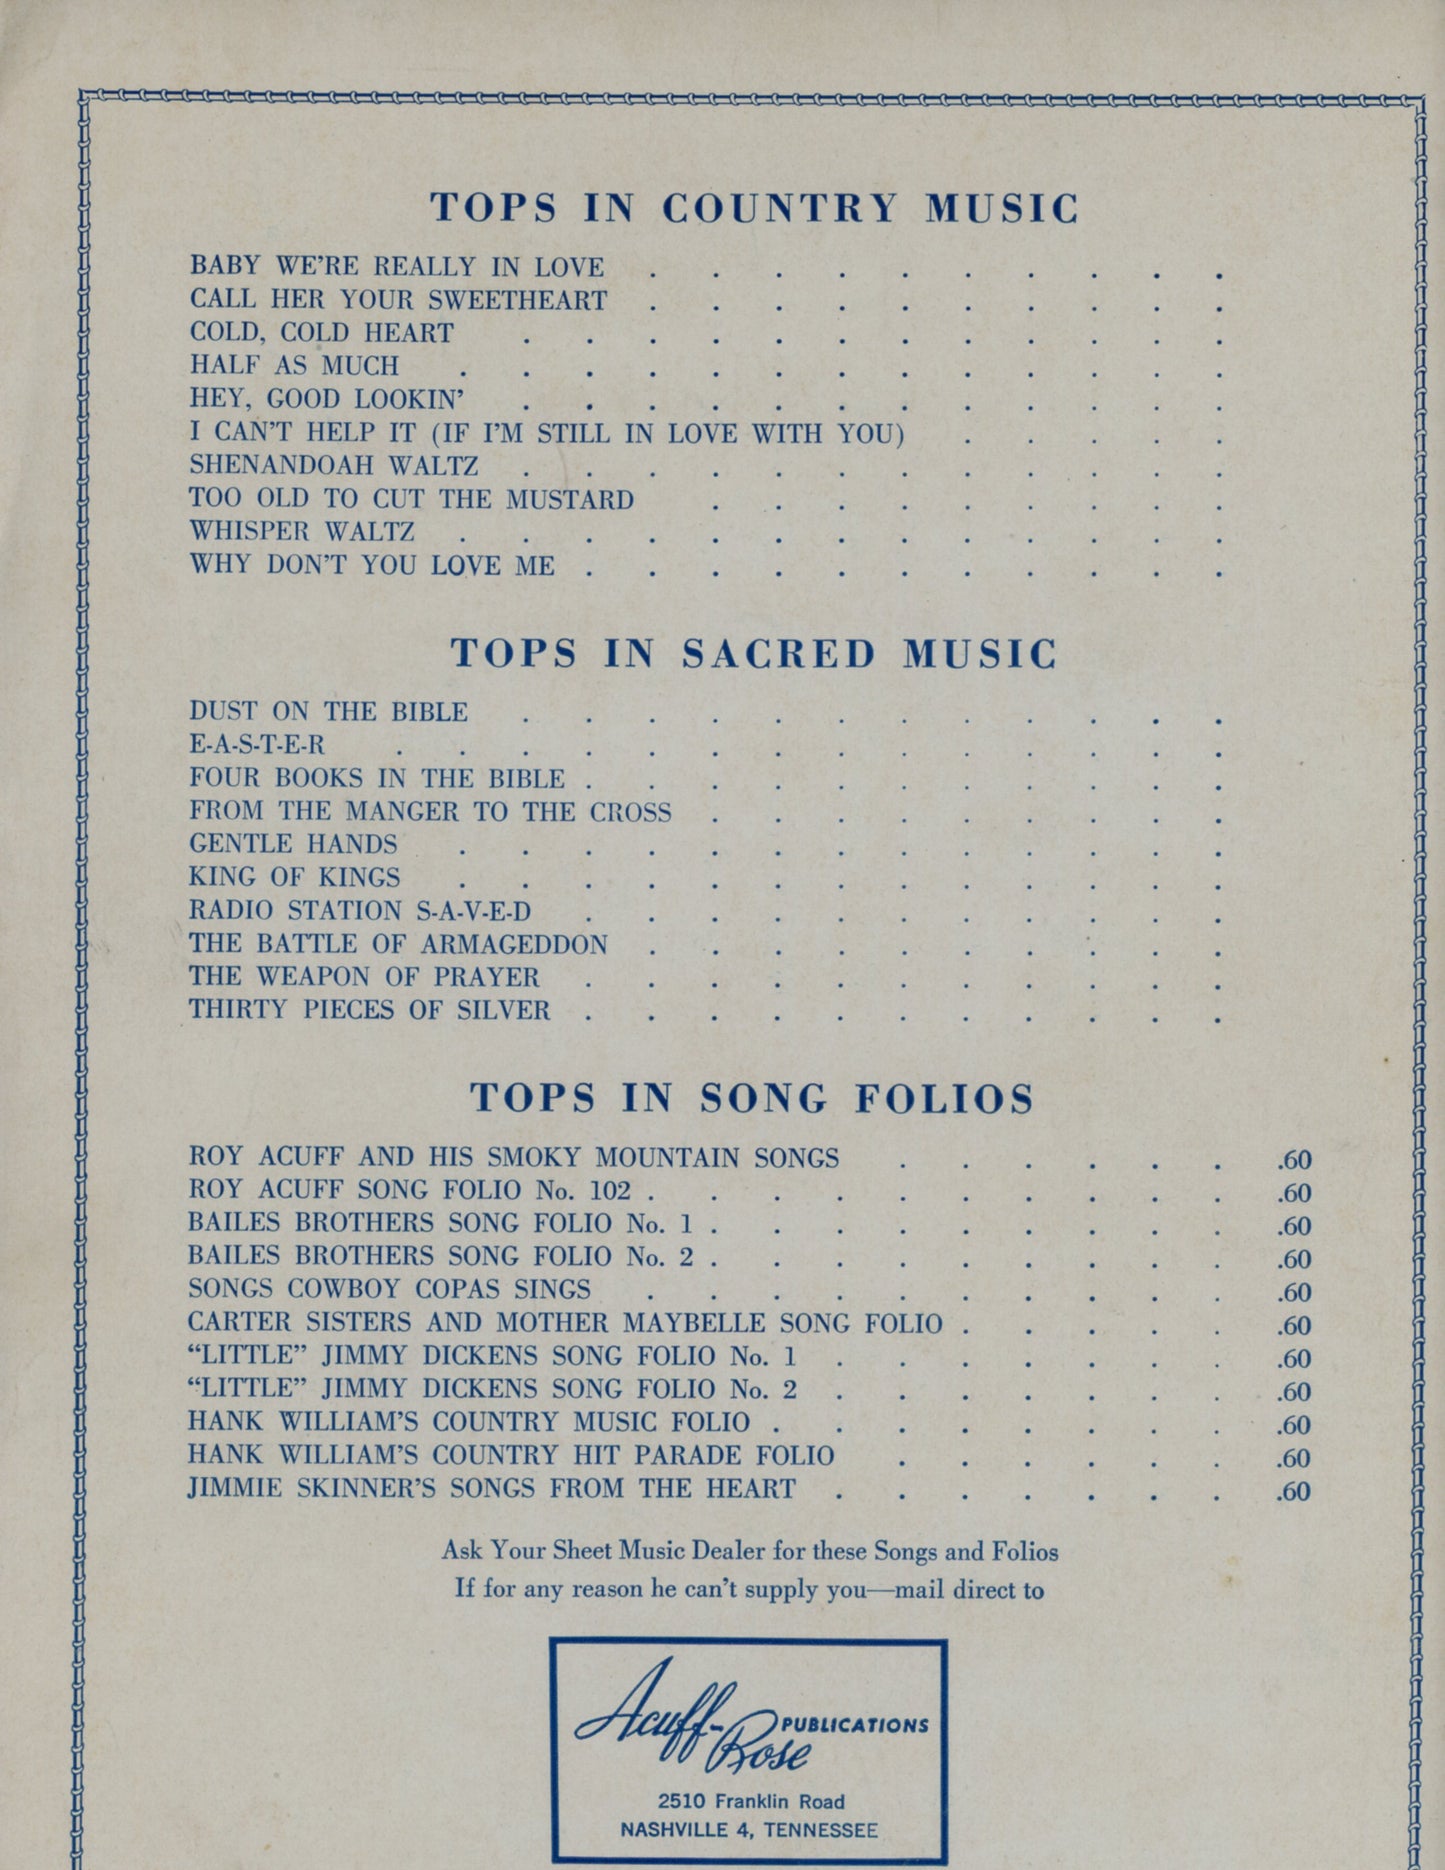 FROM THE MANGER TO THE CROSS Vintage Sheet Music by Odell McLeod ©1950